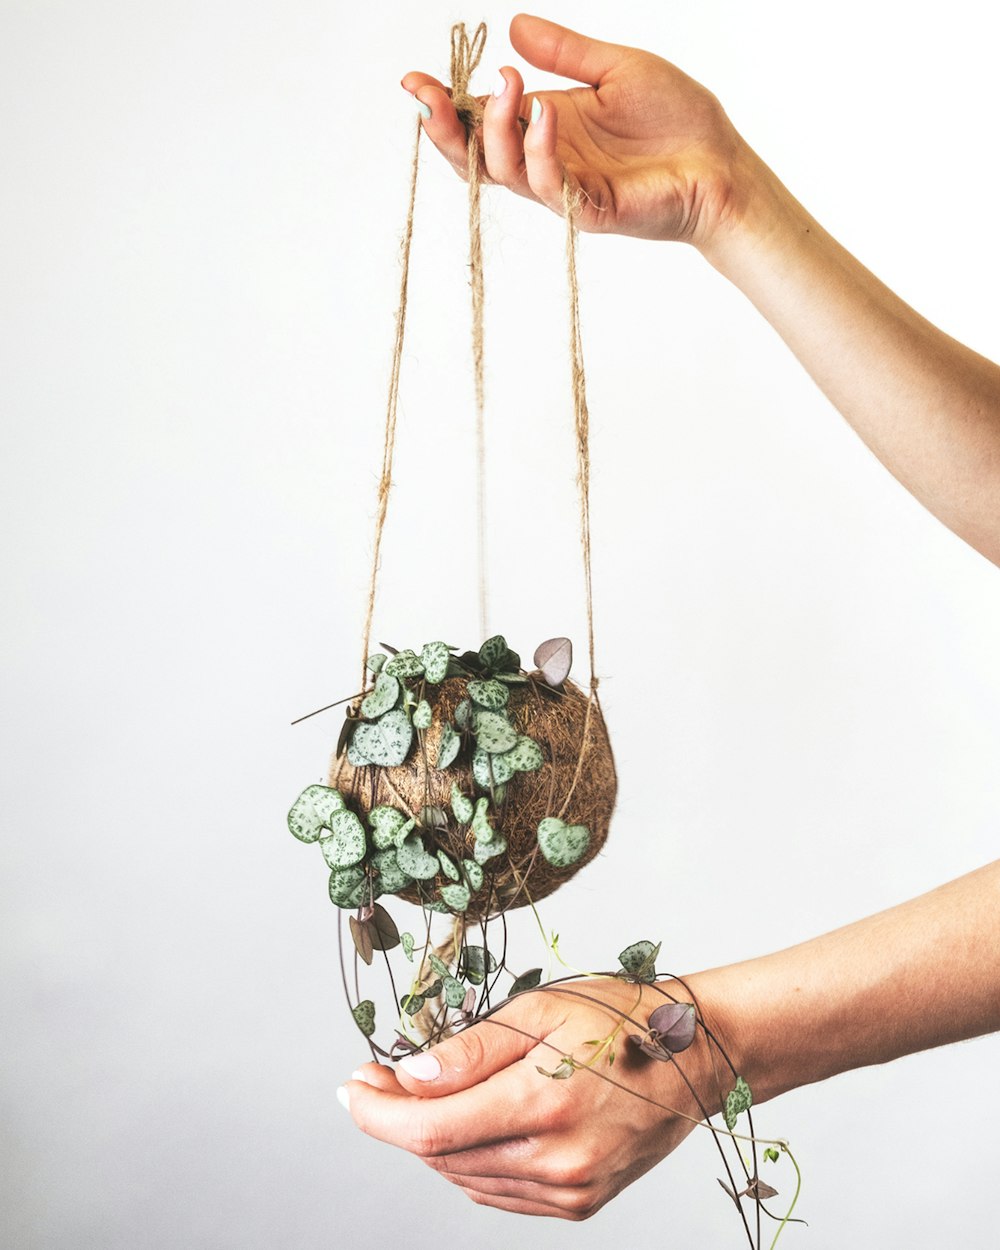 person holding green and brown hanging decor